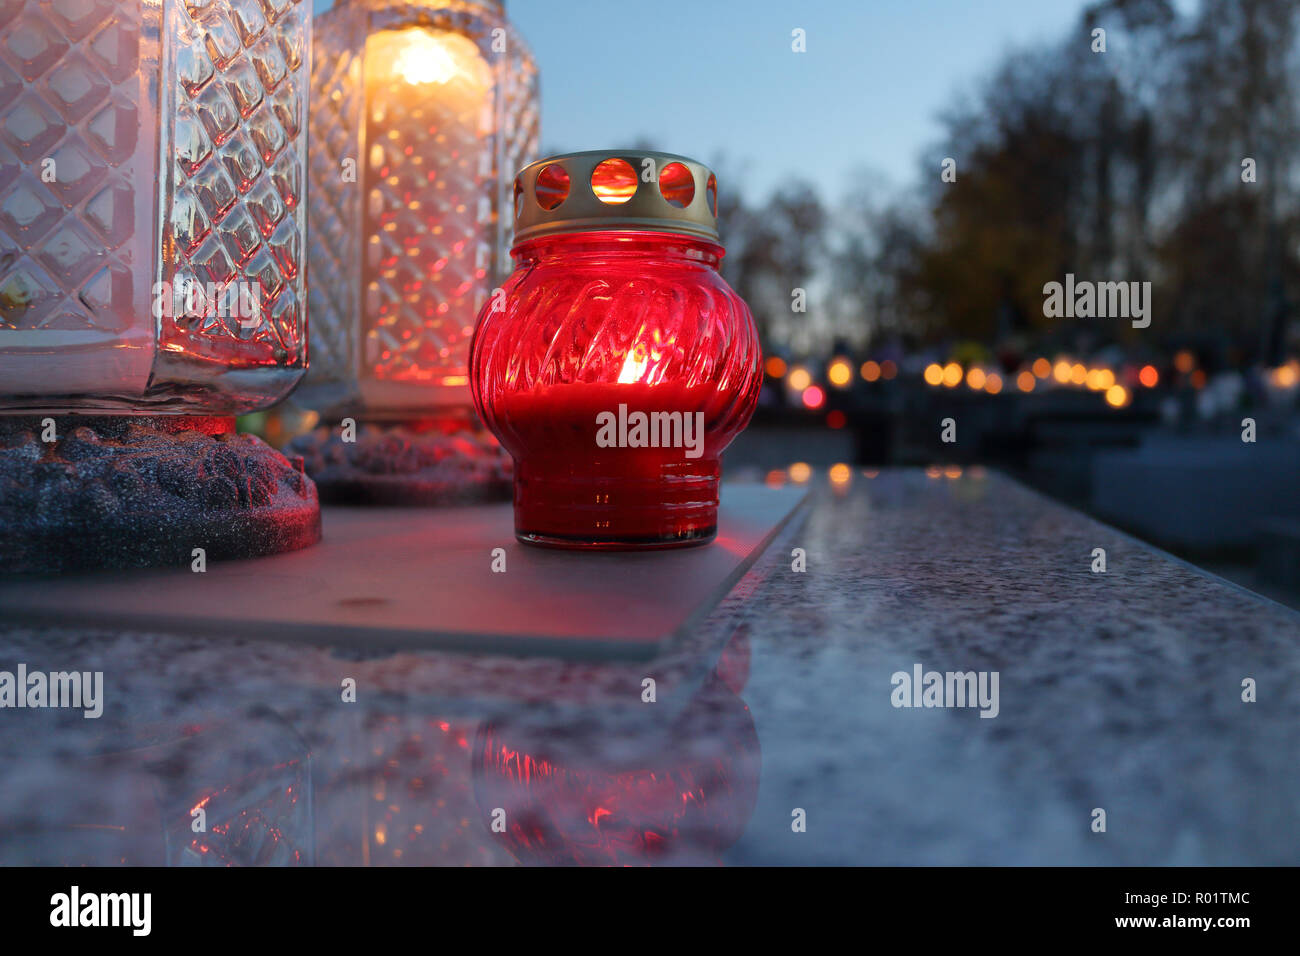 ZACHELMIE, POLAND - OCTOBER 31, 2018: Candles laid on graves in cemetery on the eve of All Saints' Day. Credit: Slawomir Wojcik/Alamy Live News Stock Photo